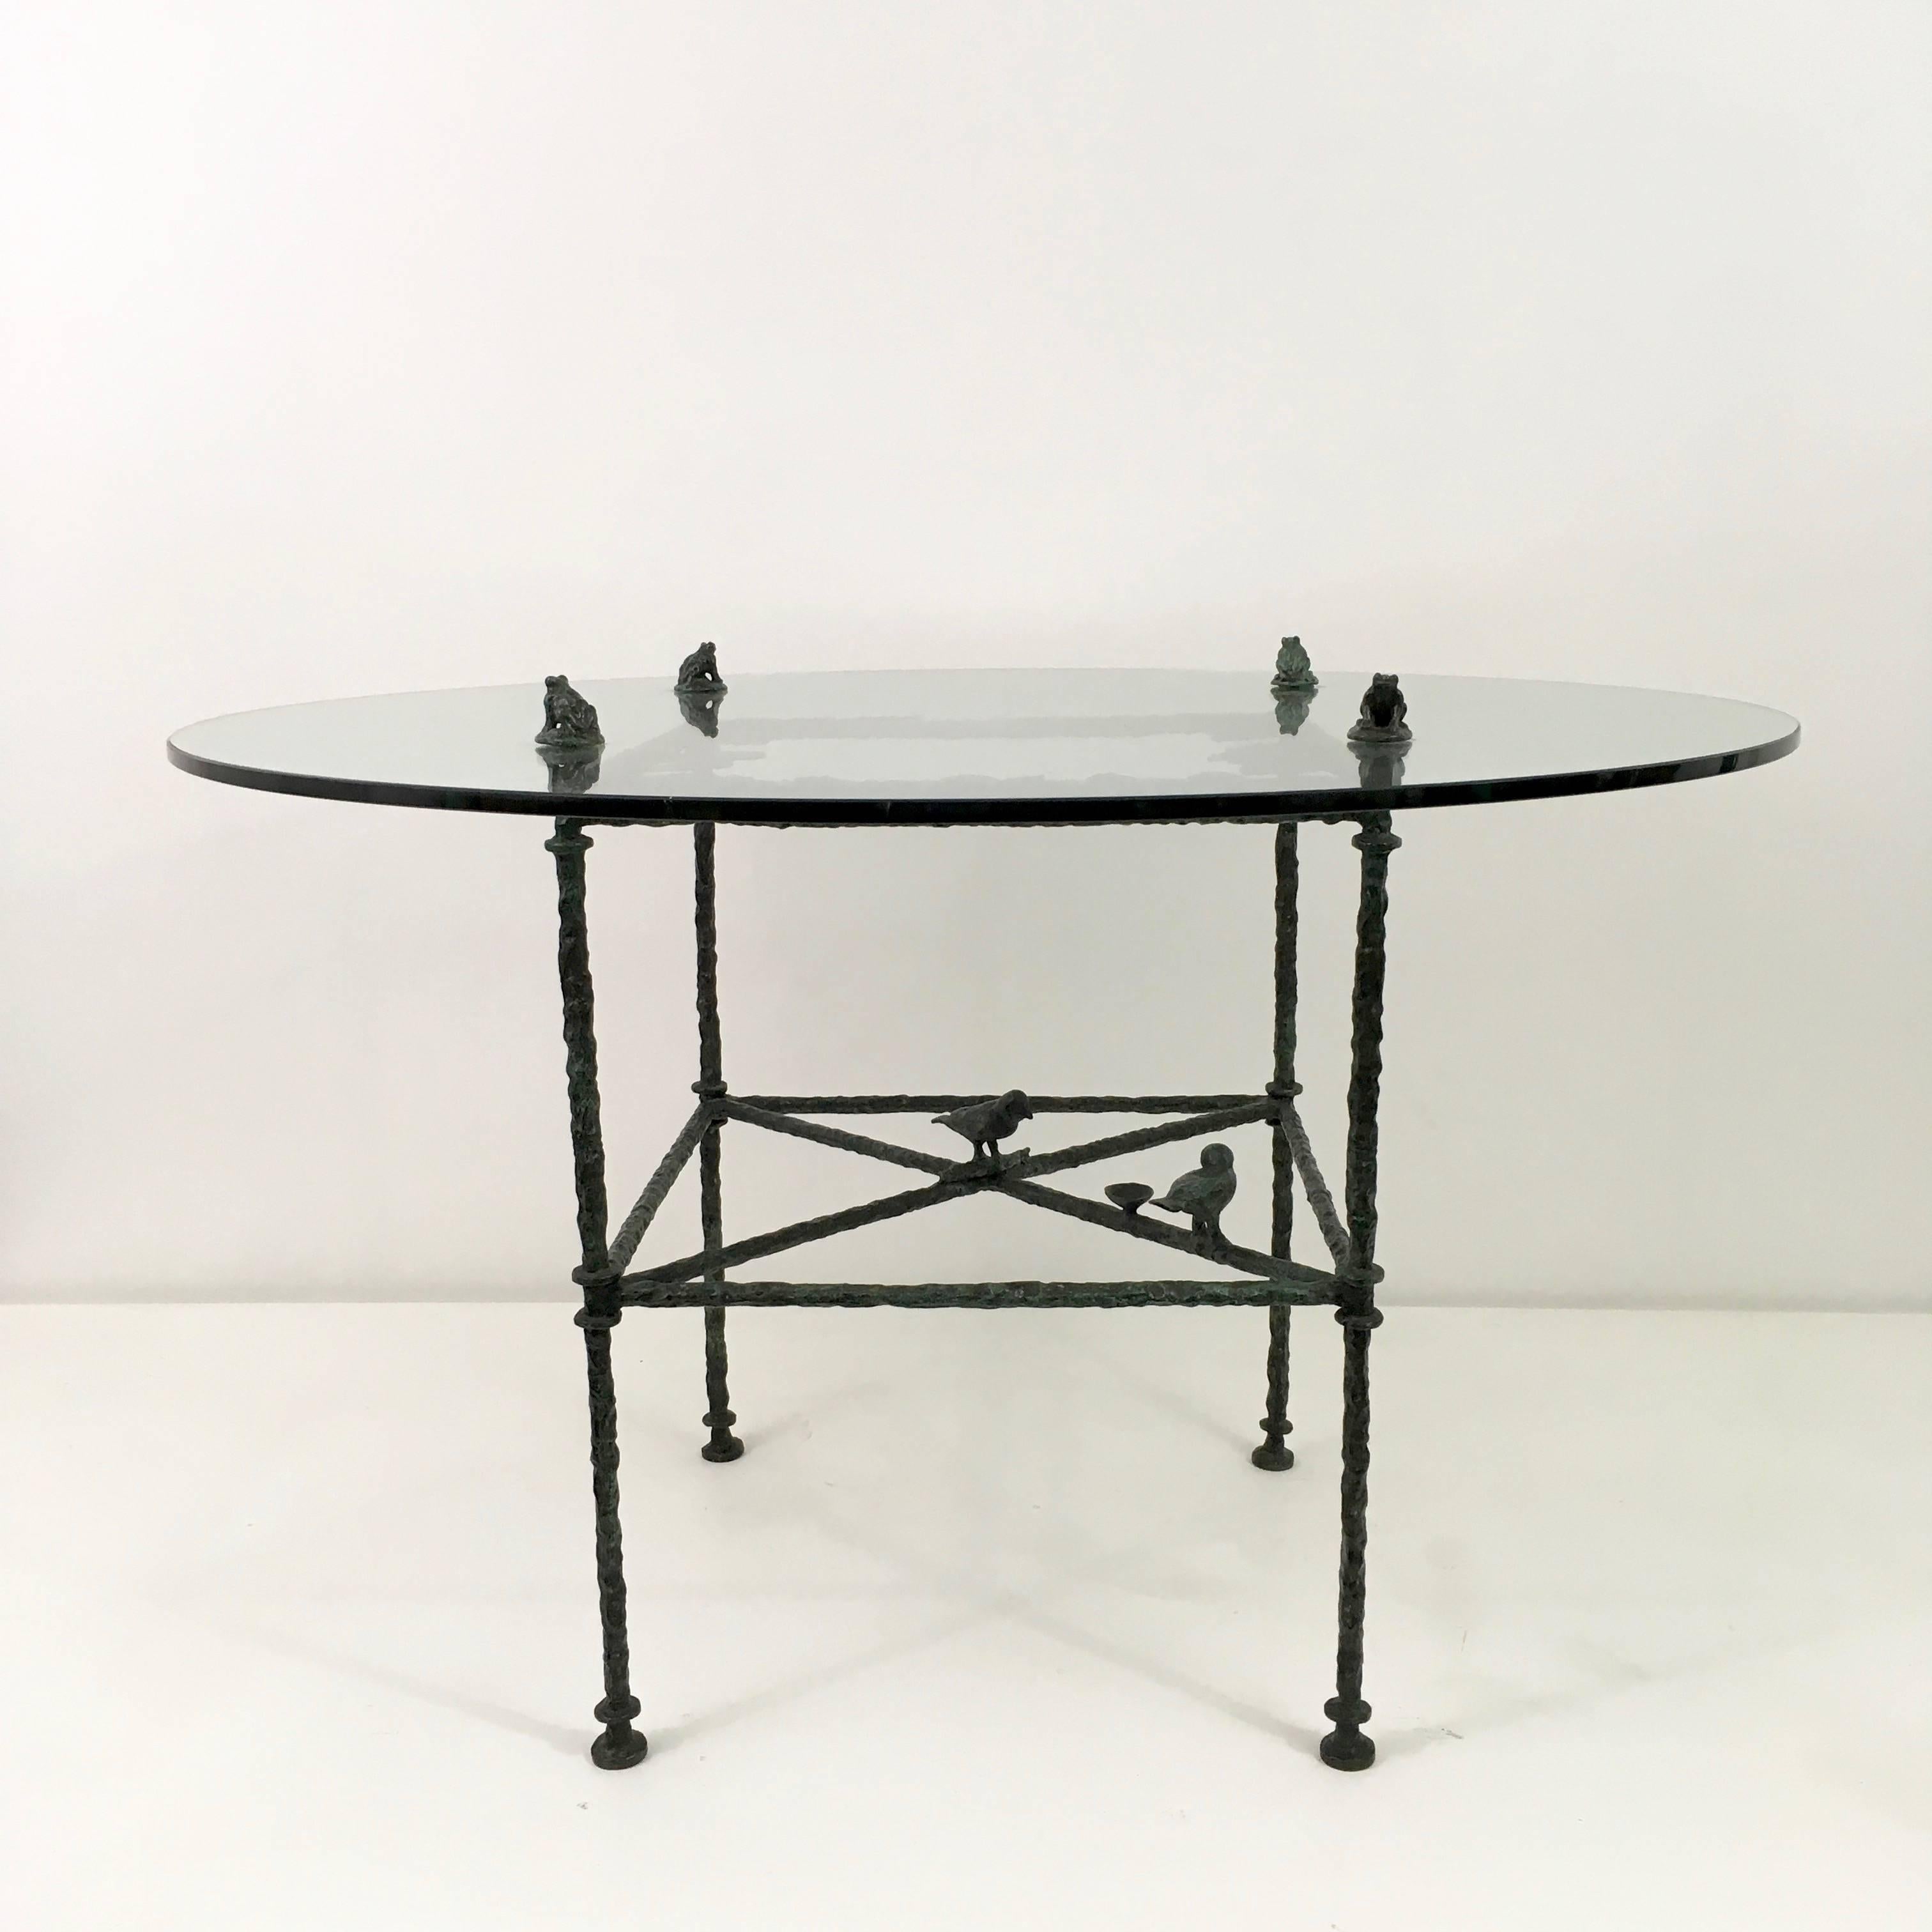 A spectacular Diego Giacometti table.
Fully signed and documented with an impeccable provenance.